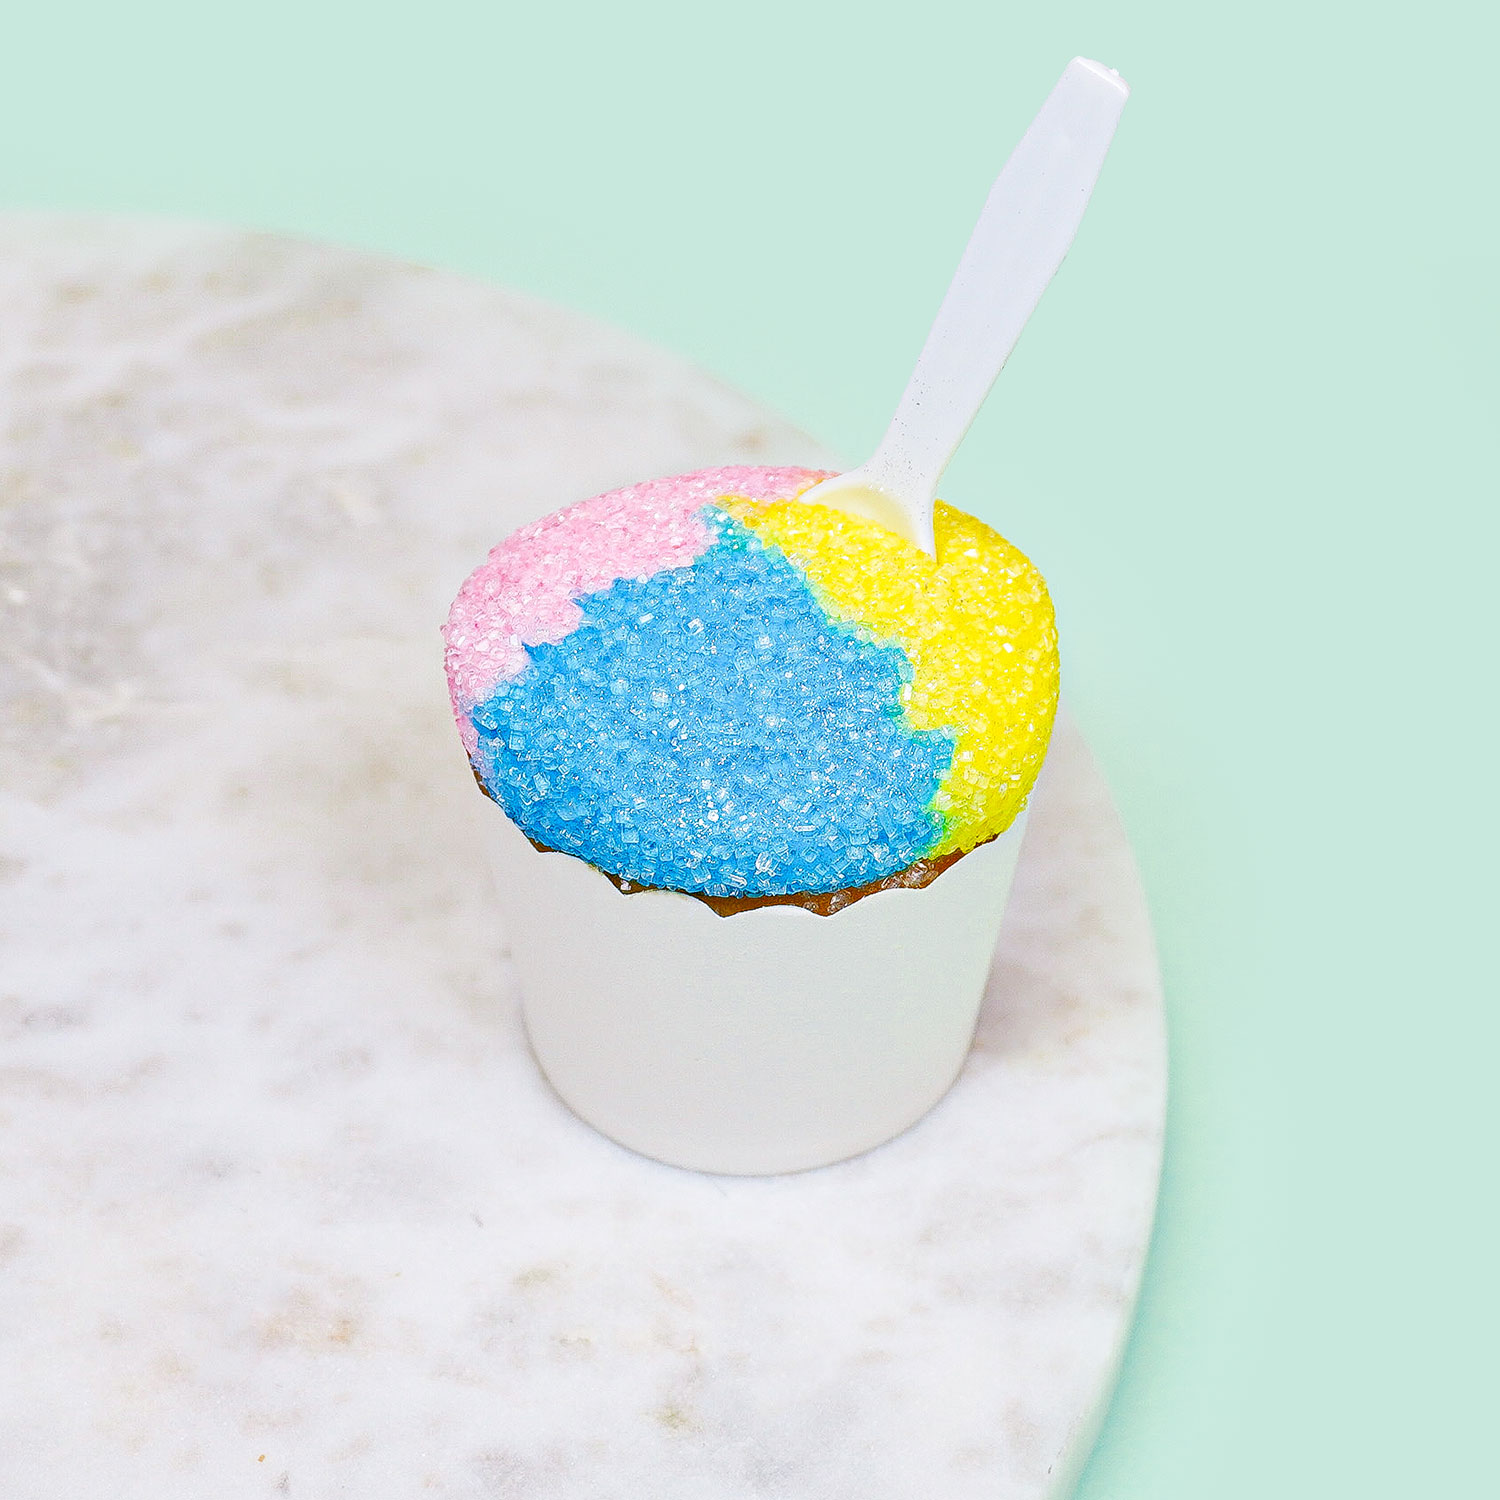 cupcake decorated to look like a snowcone